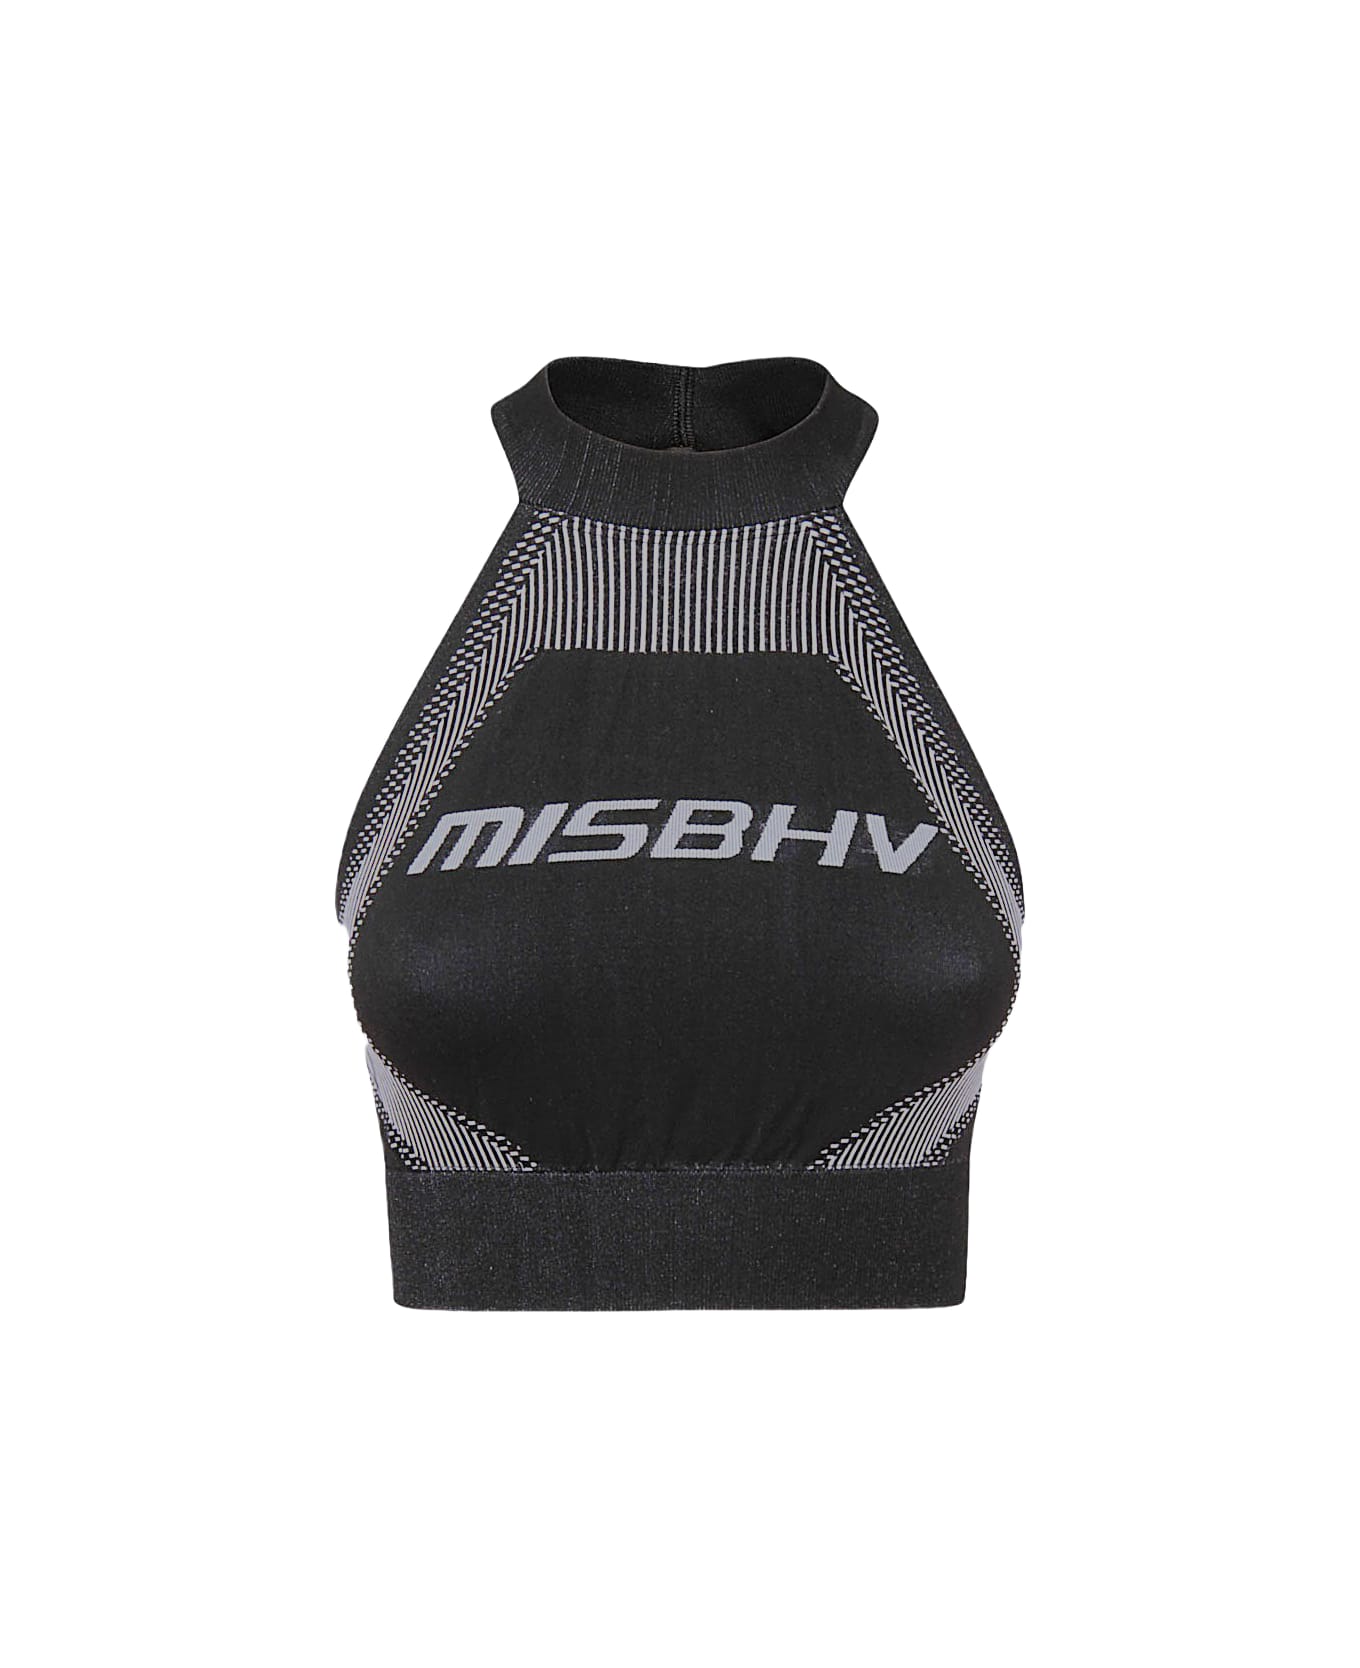 MISBHV Black And White Top - MUTED BLACK タンクトップ